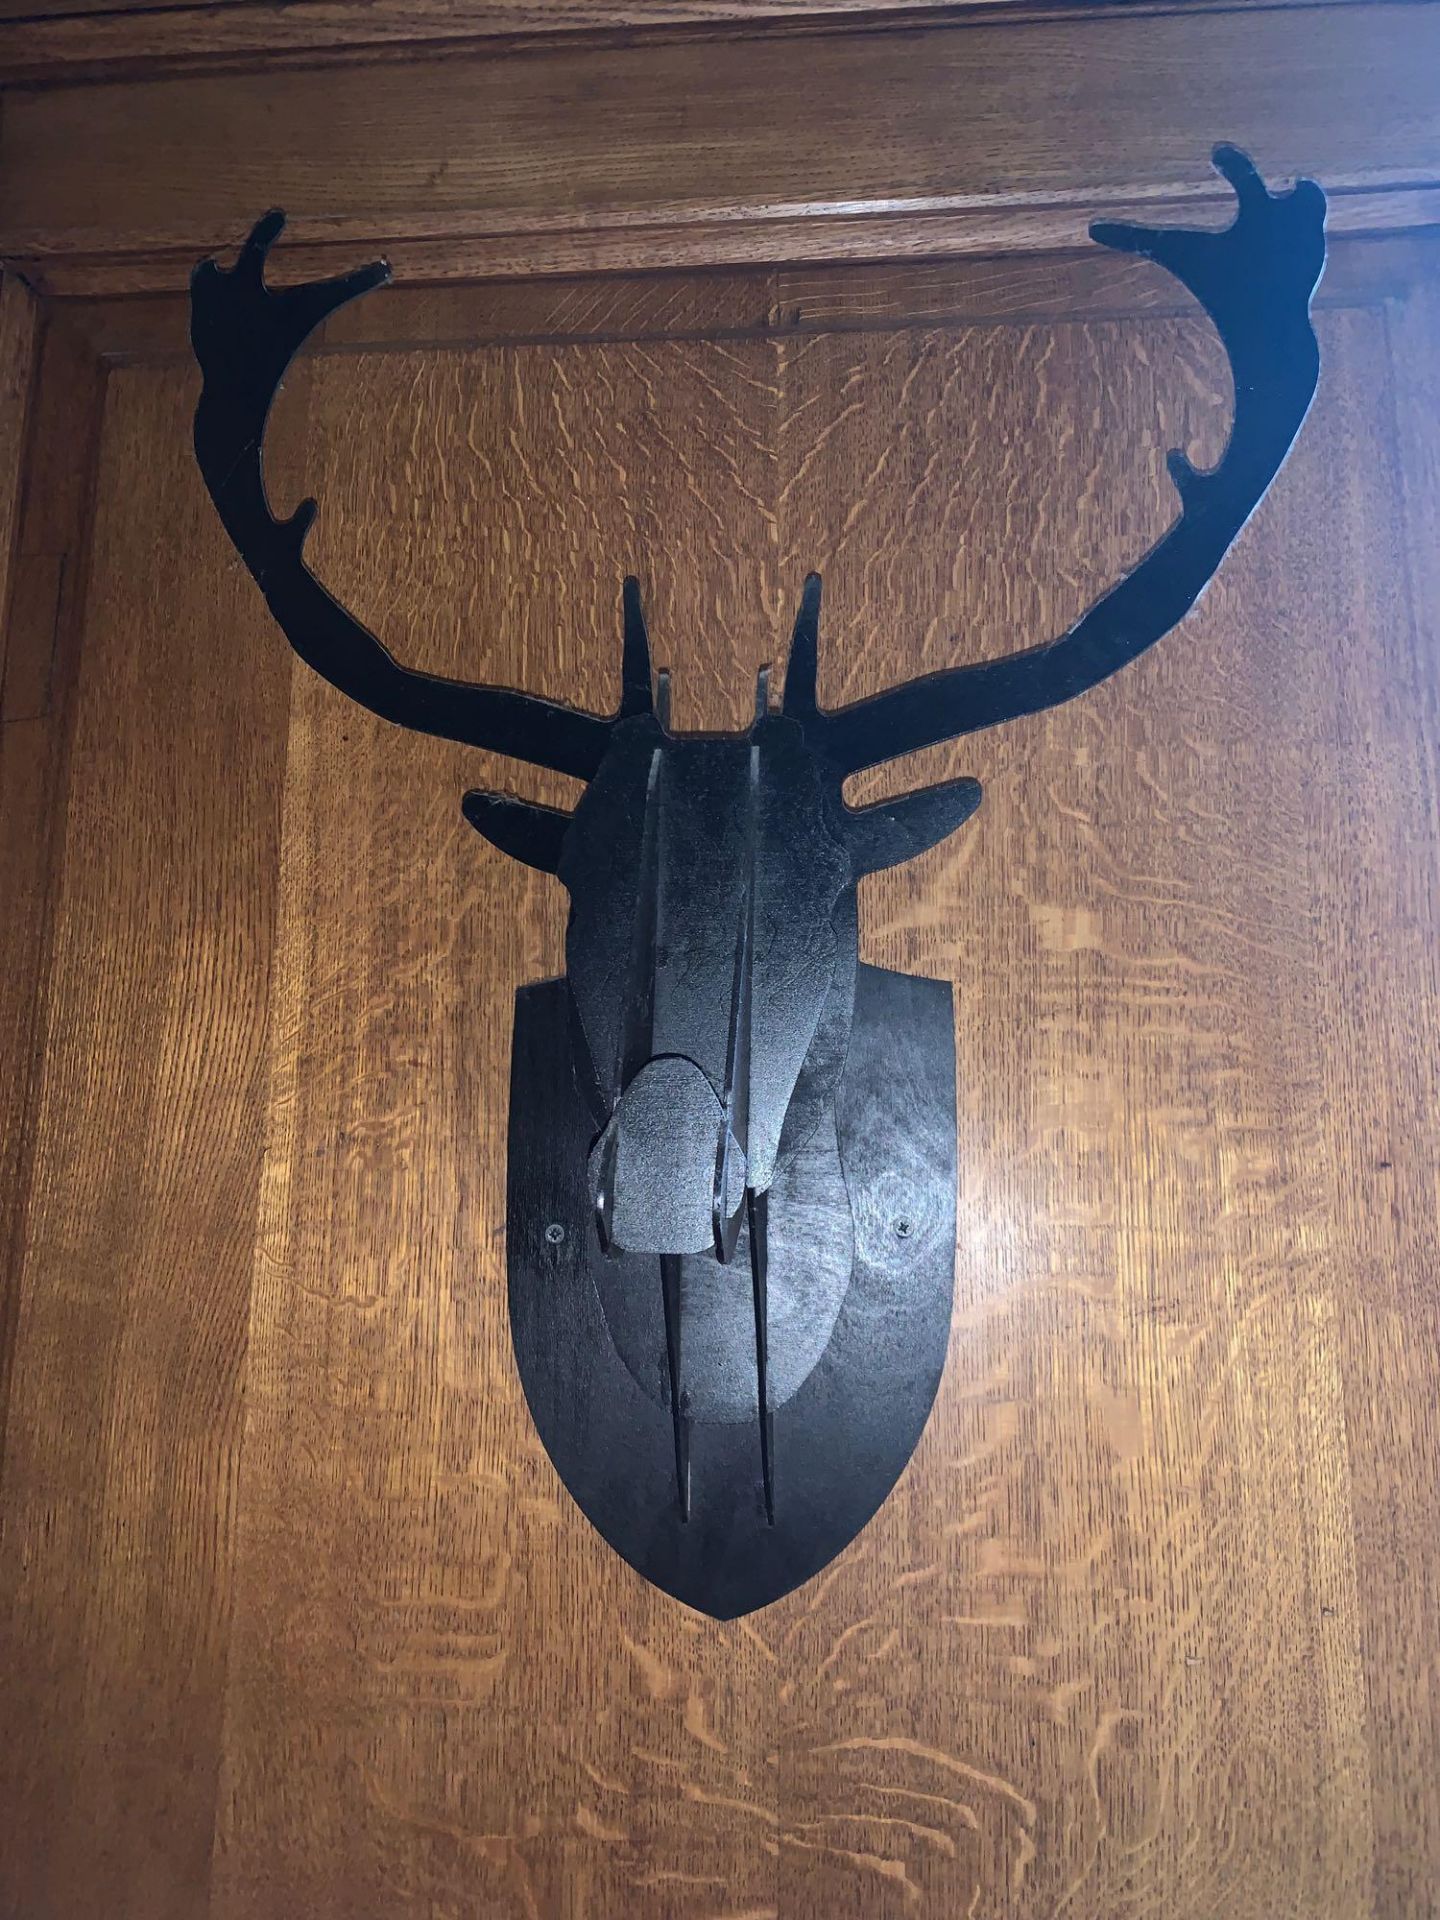 Established And Sons Stag Head Wall Decoration - Image 2 of 3